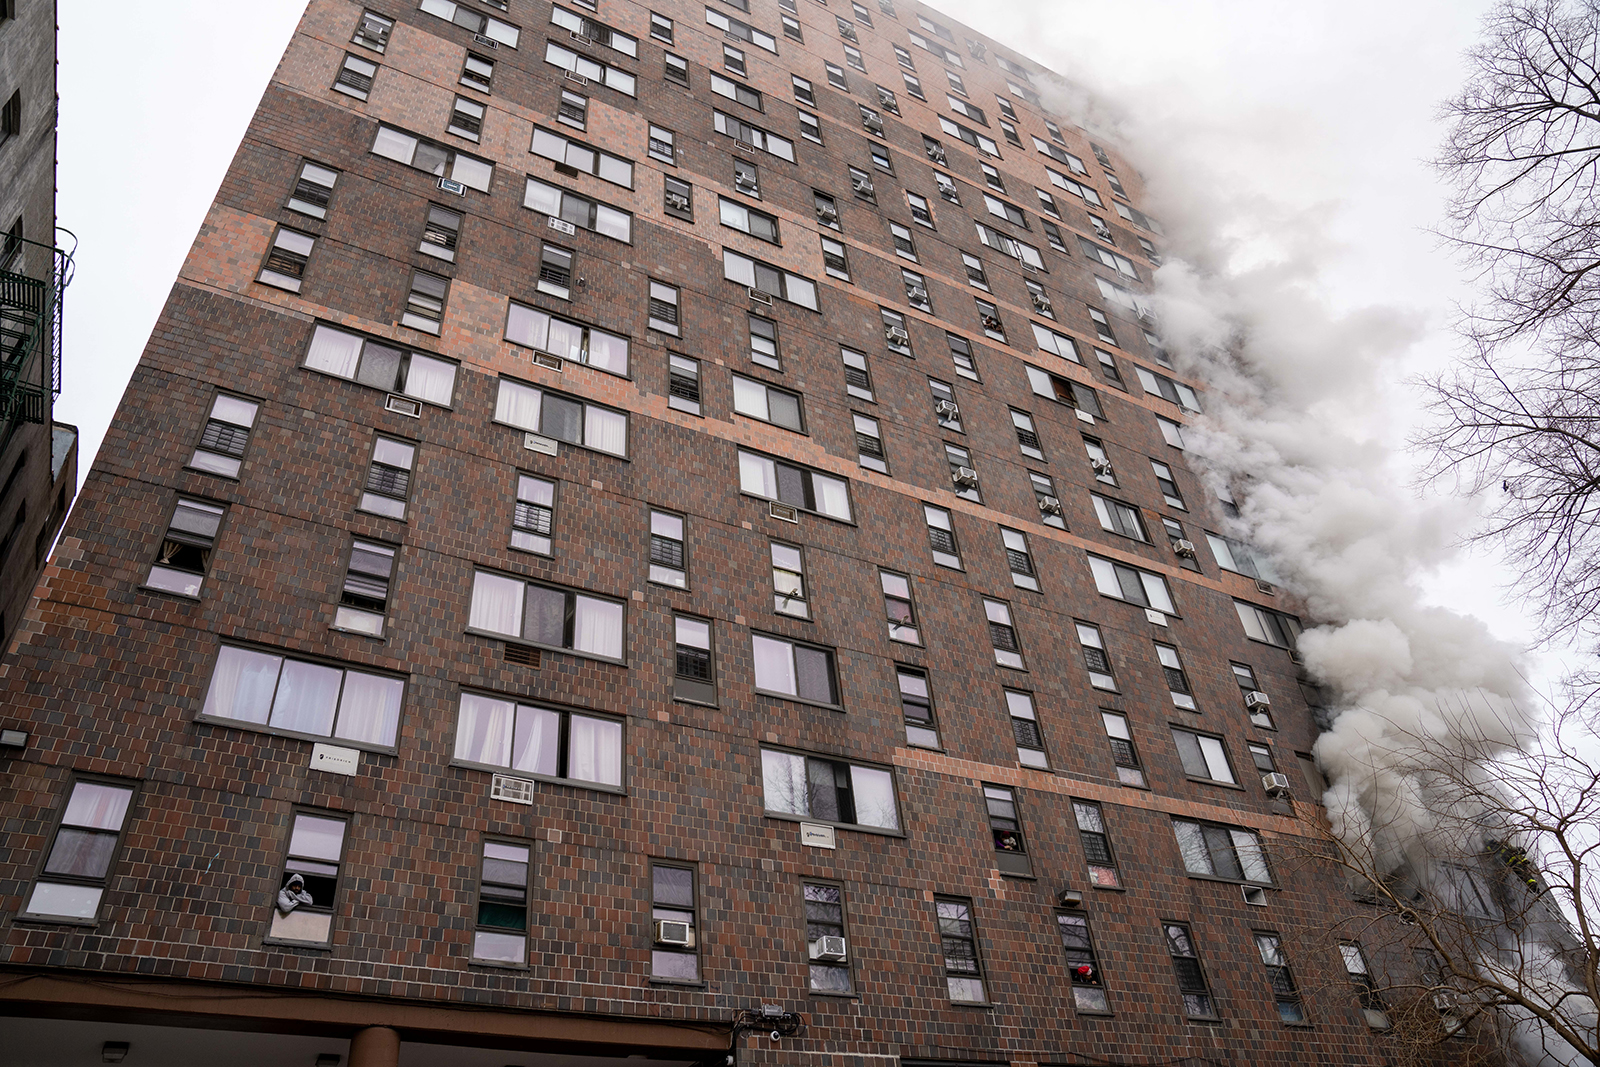 CHCF Demands Accountability for Landlords After Horrific Fire in the Bronx